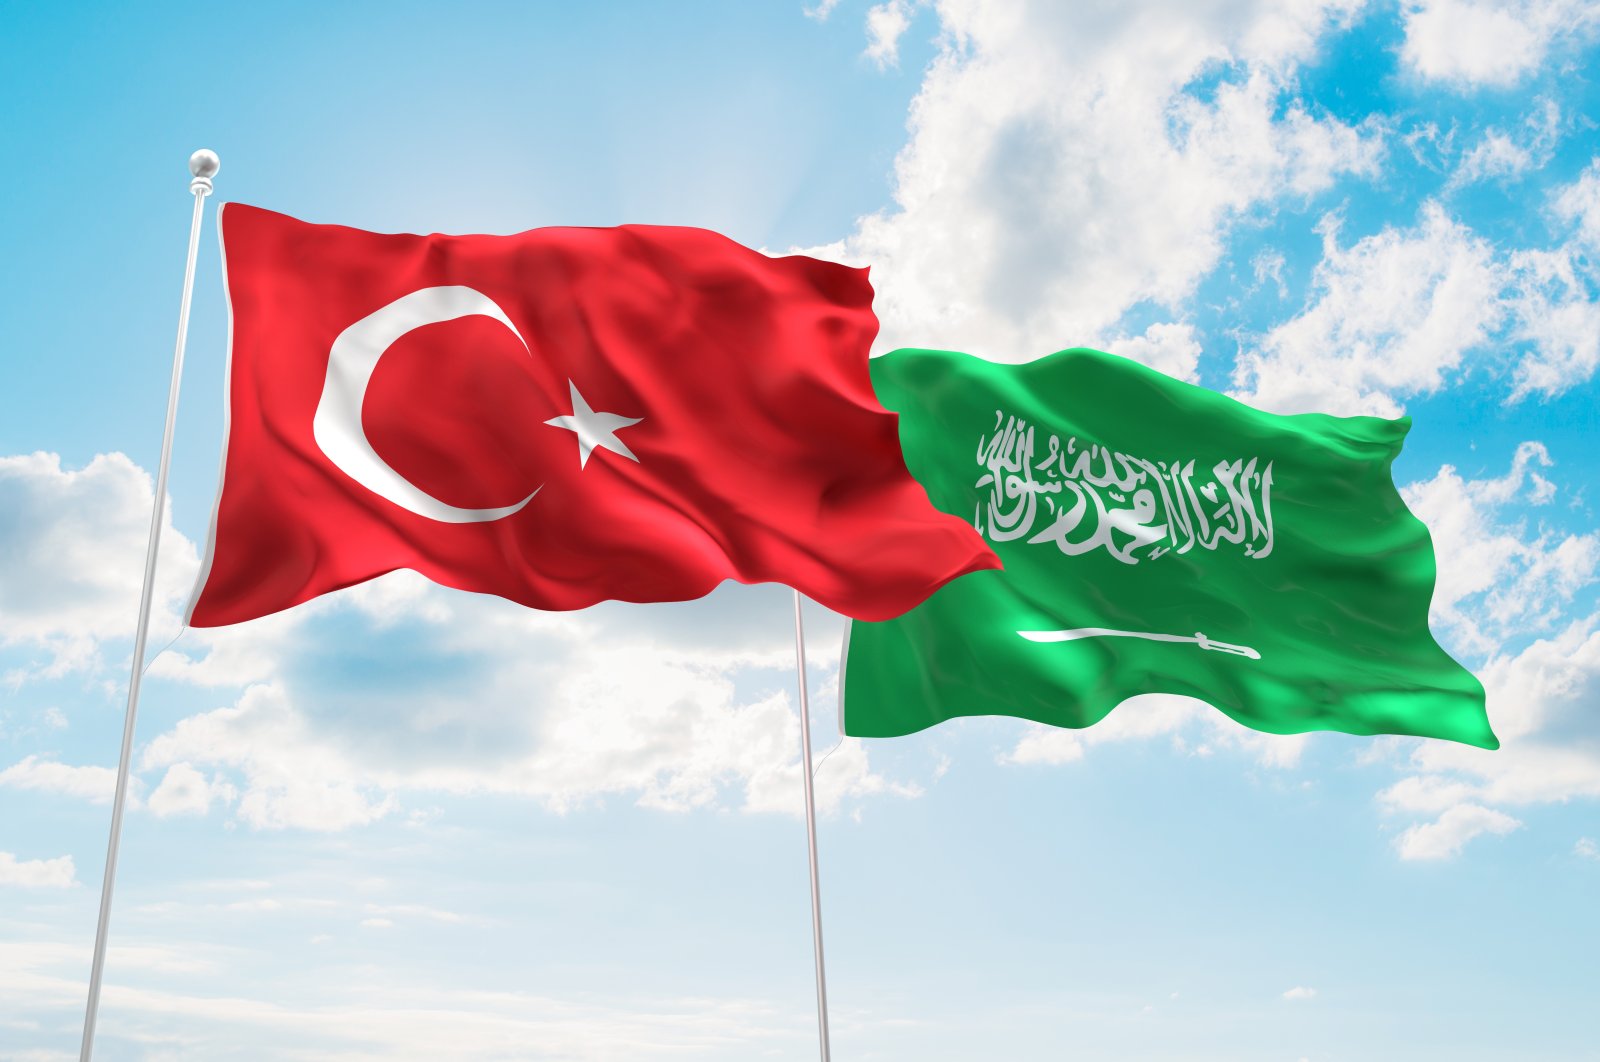  Turkish and Saudi Arabian flags waving in the sky in this undated file photo. (Shutterstock File Photo)